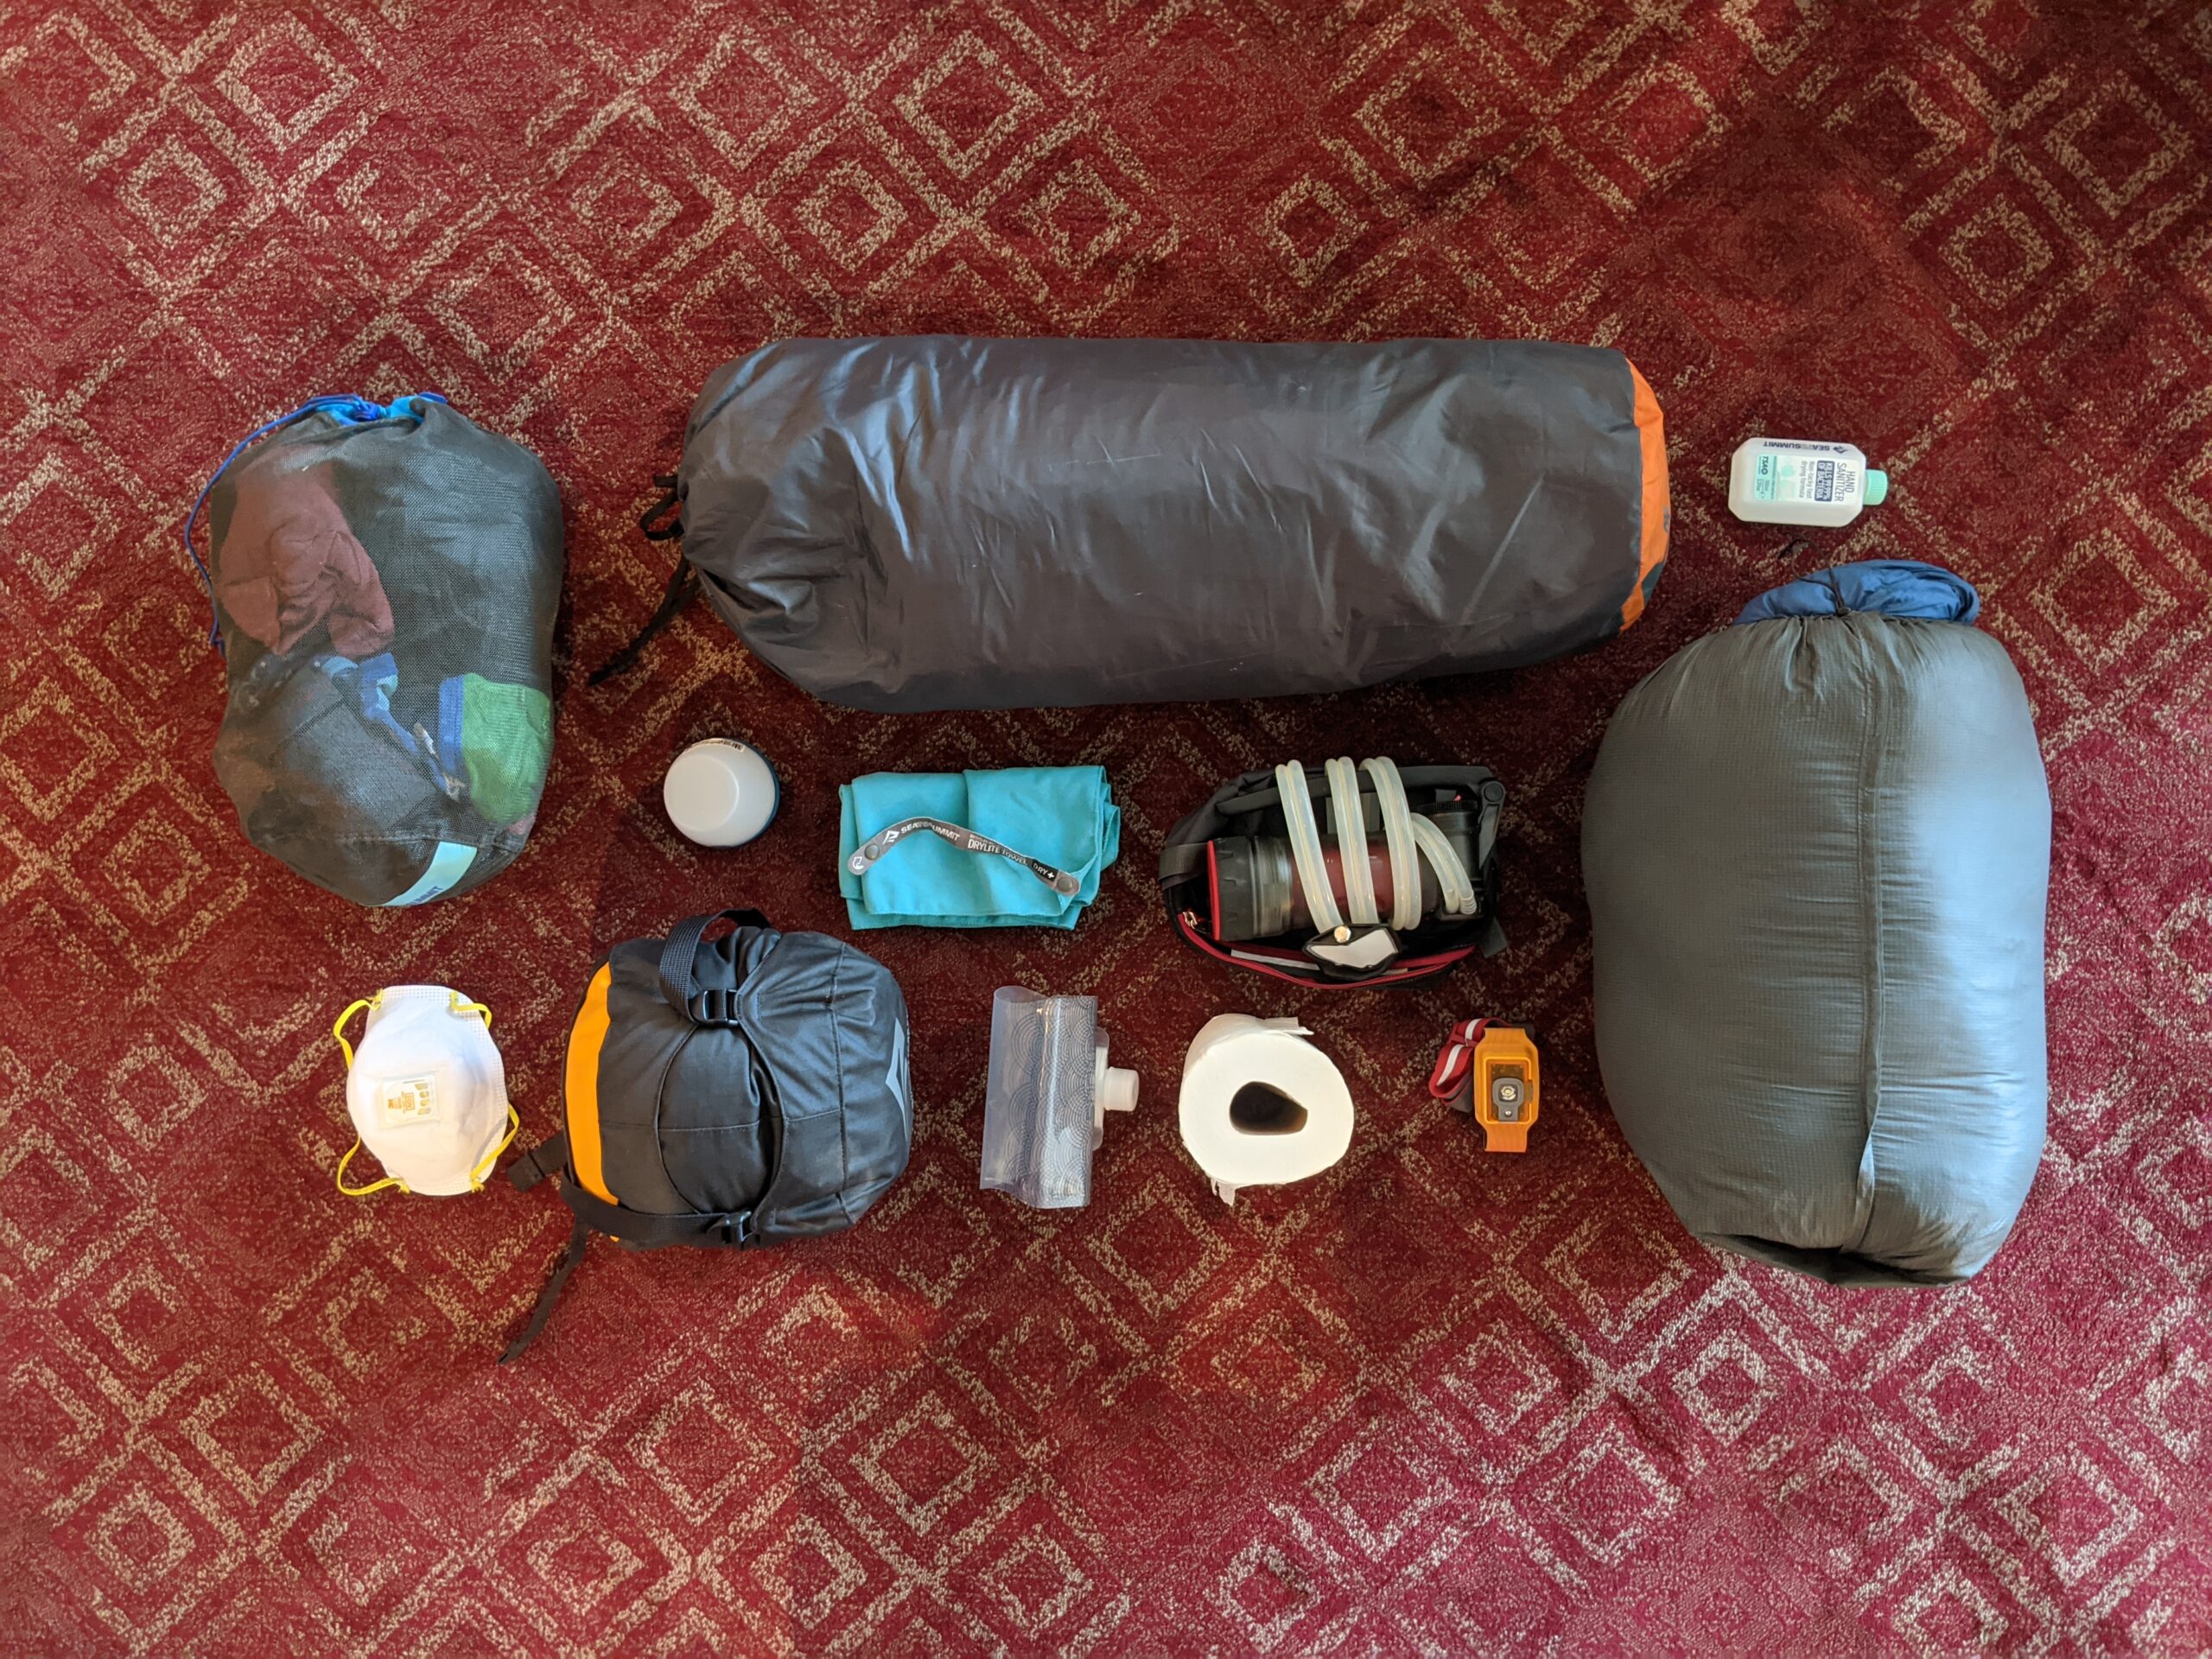 Go Bag List: What to Pack for an Emergency